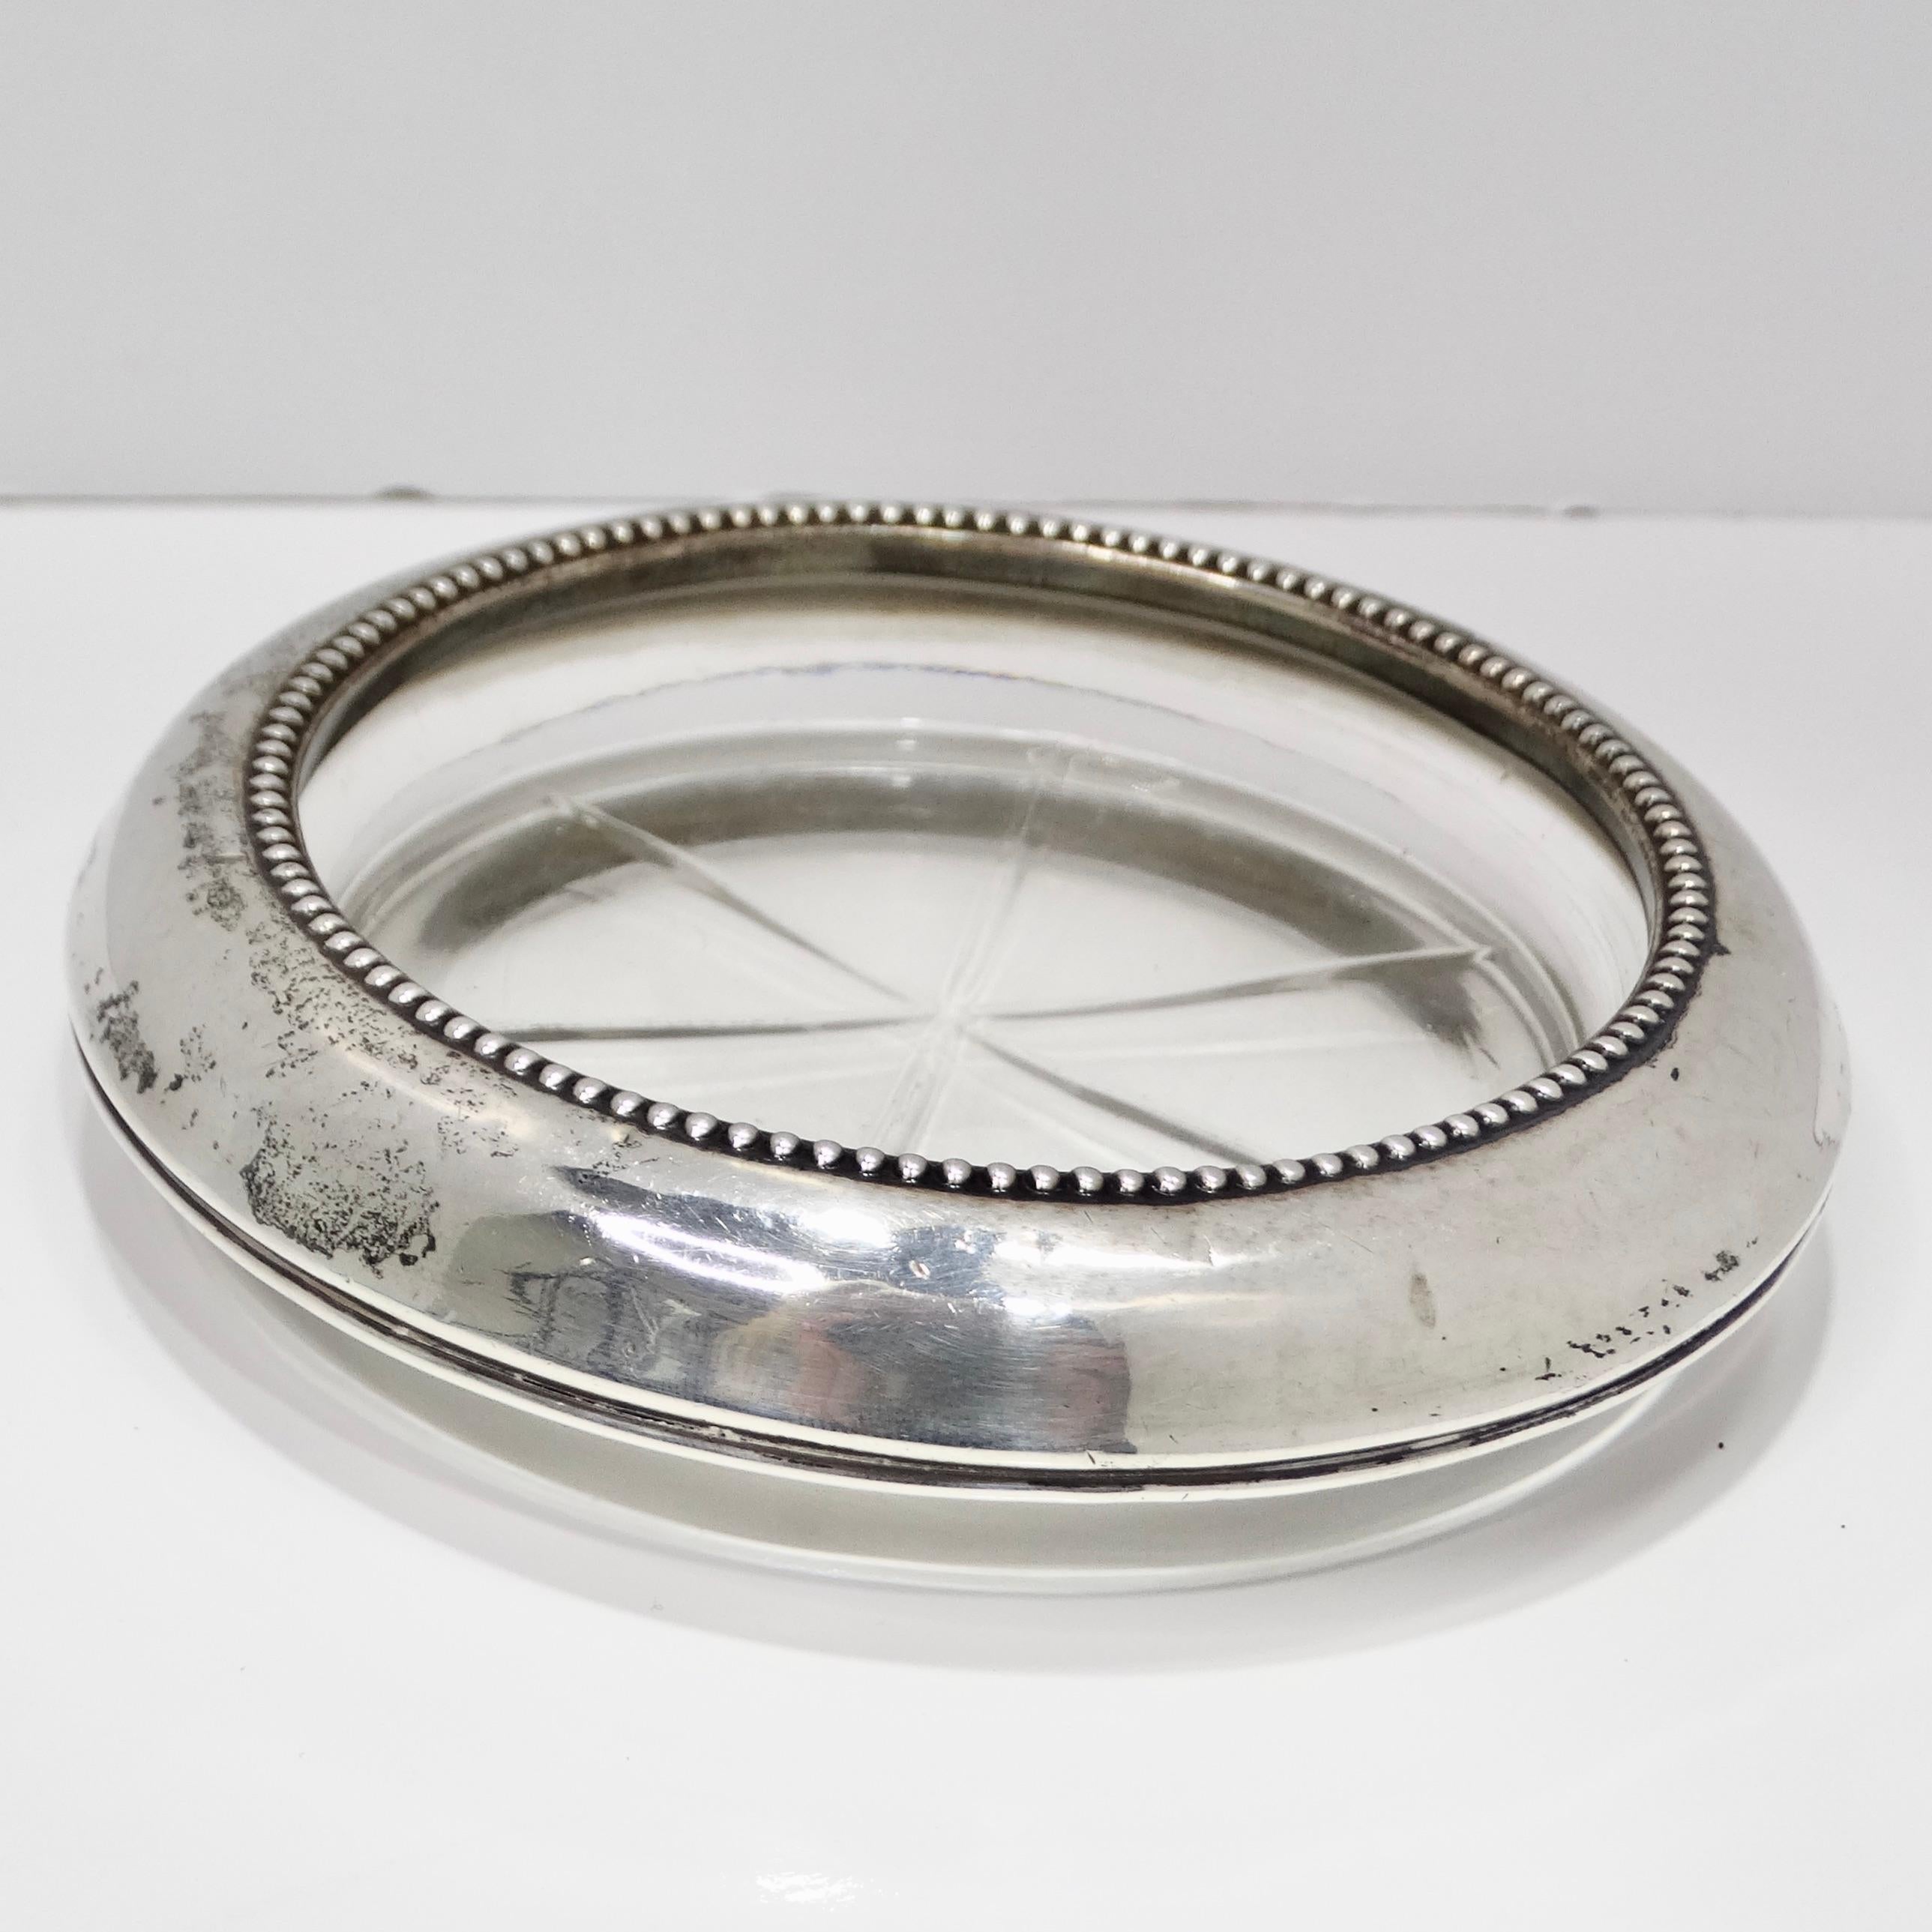 Frank M. Whiting & Co Antique Pure Silver Glass Ash Tray In Good Condition For Sale In Scottsdale, AZ